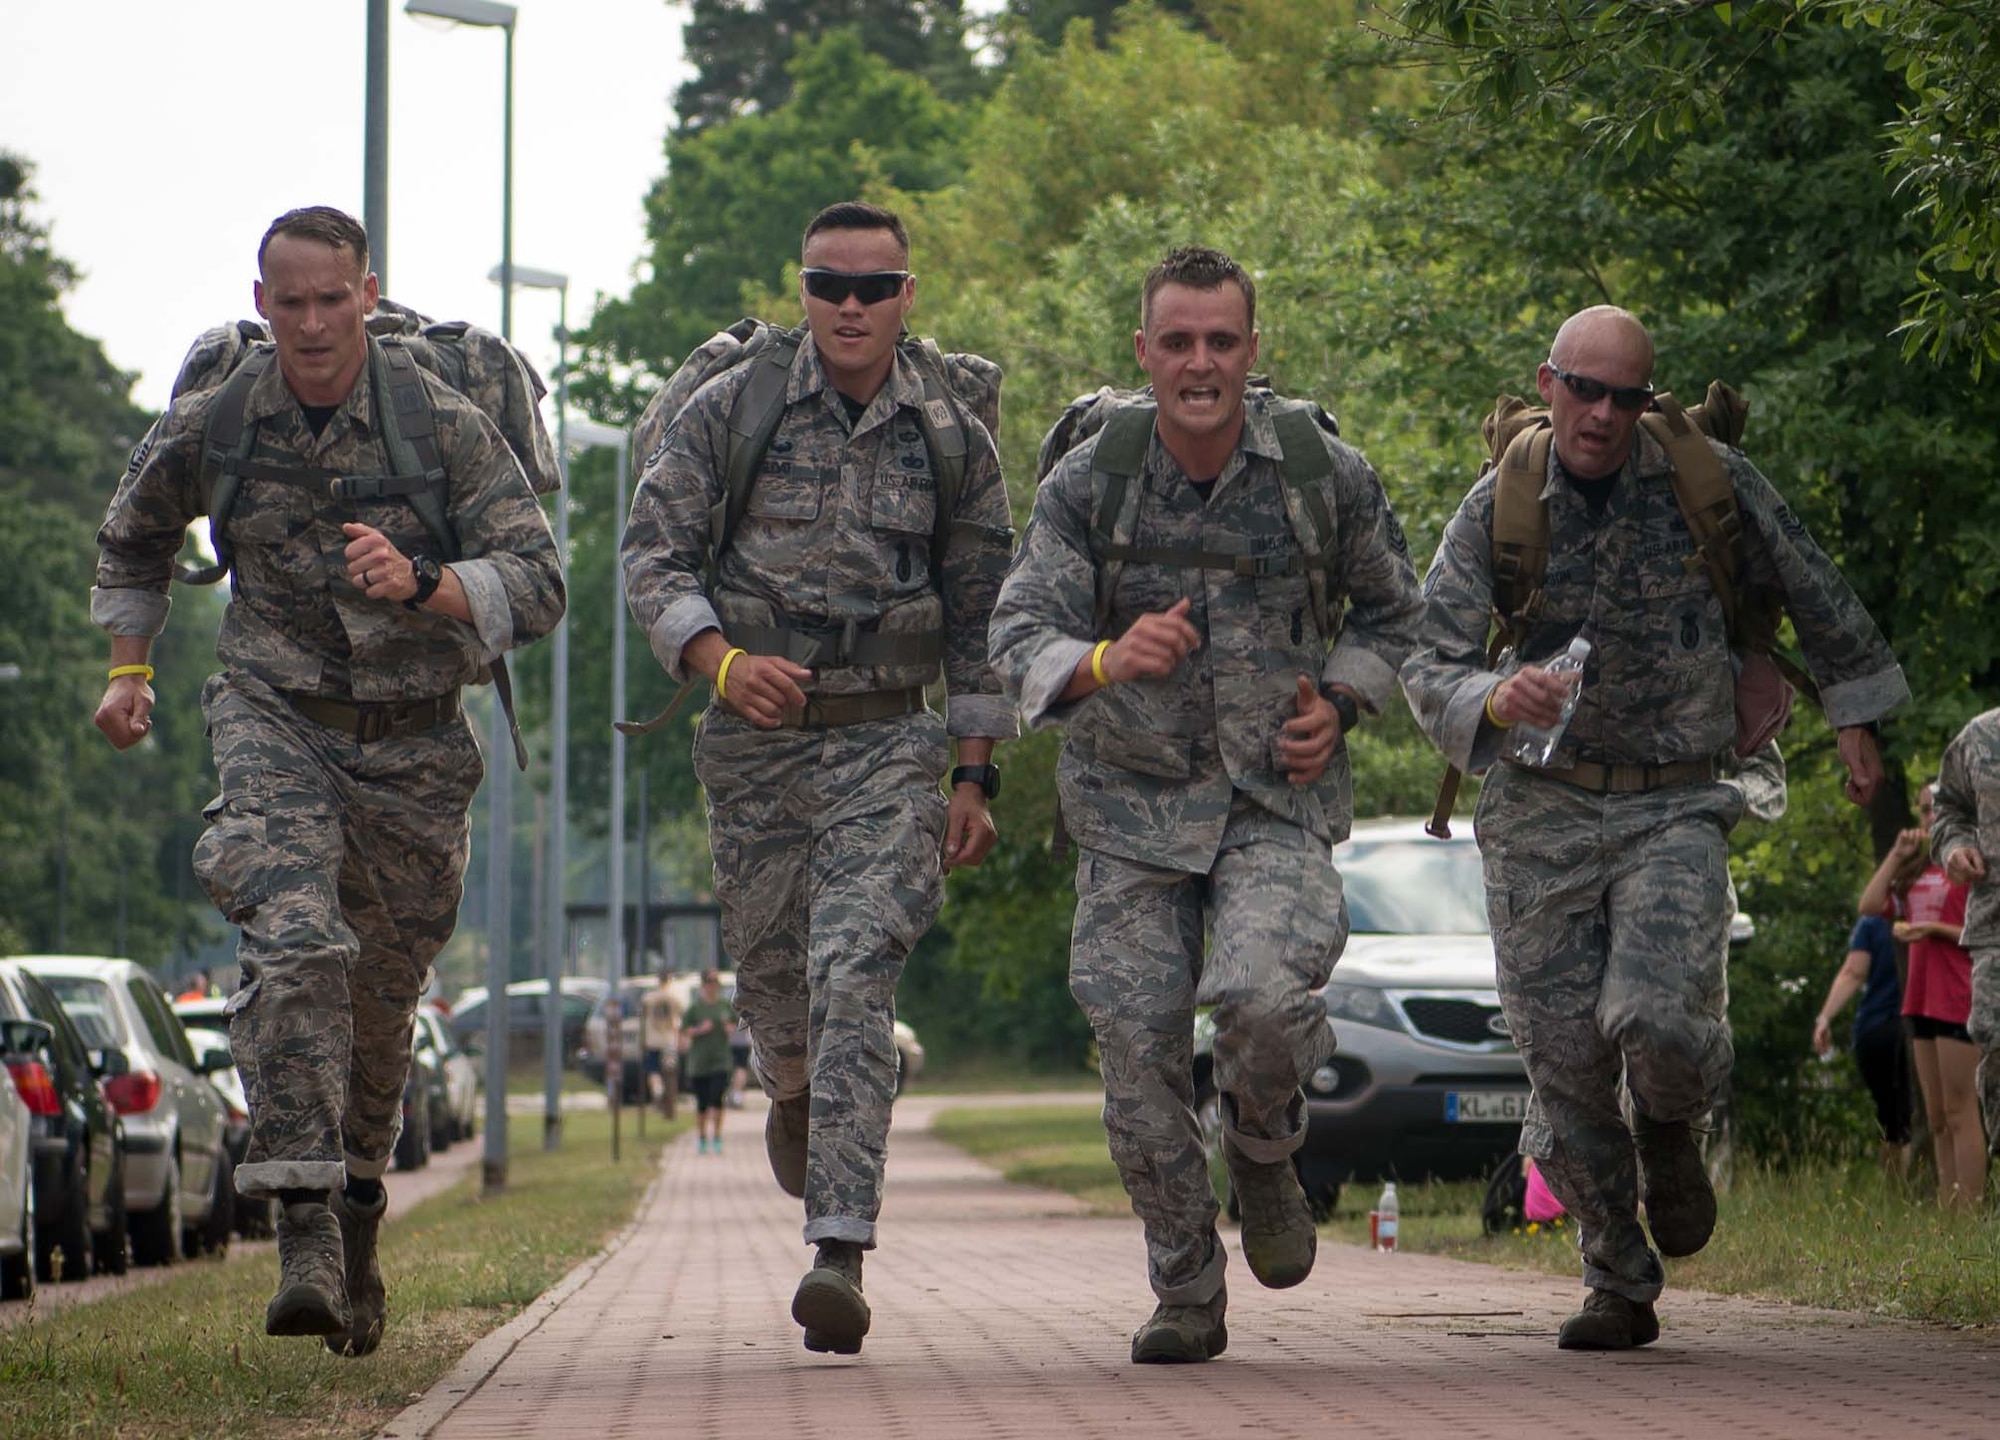 The winners of the Second Annual Chief Master Sgt. of the Air Force Paul Airey Memorial 10K ruck, charge for the finish line on Ramstein Air Base, June 2, 2017. Teams from various squadrons in the Kaiserslautern Military Community area took on the 10K ruck march challenge. Participants were allowed to walk or run but they had to be in uniform and carry 25lb rucks, or backpacks, from start to finish. (U.S. Air Force photo by Airman 1st Class Elizabeth Baker)